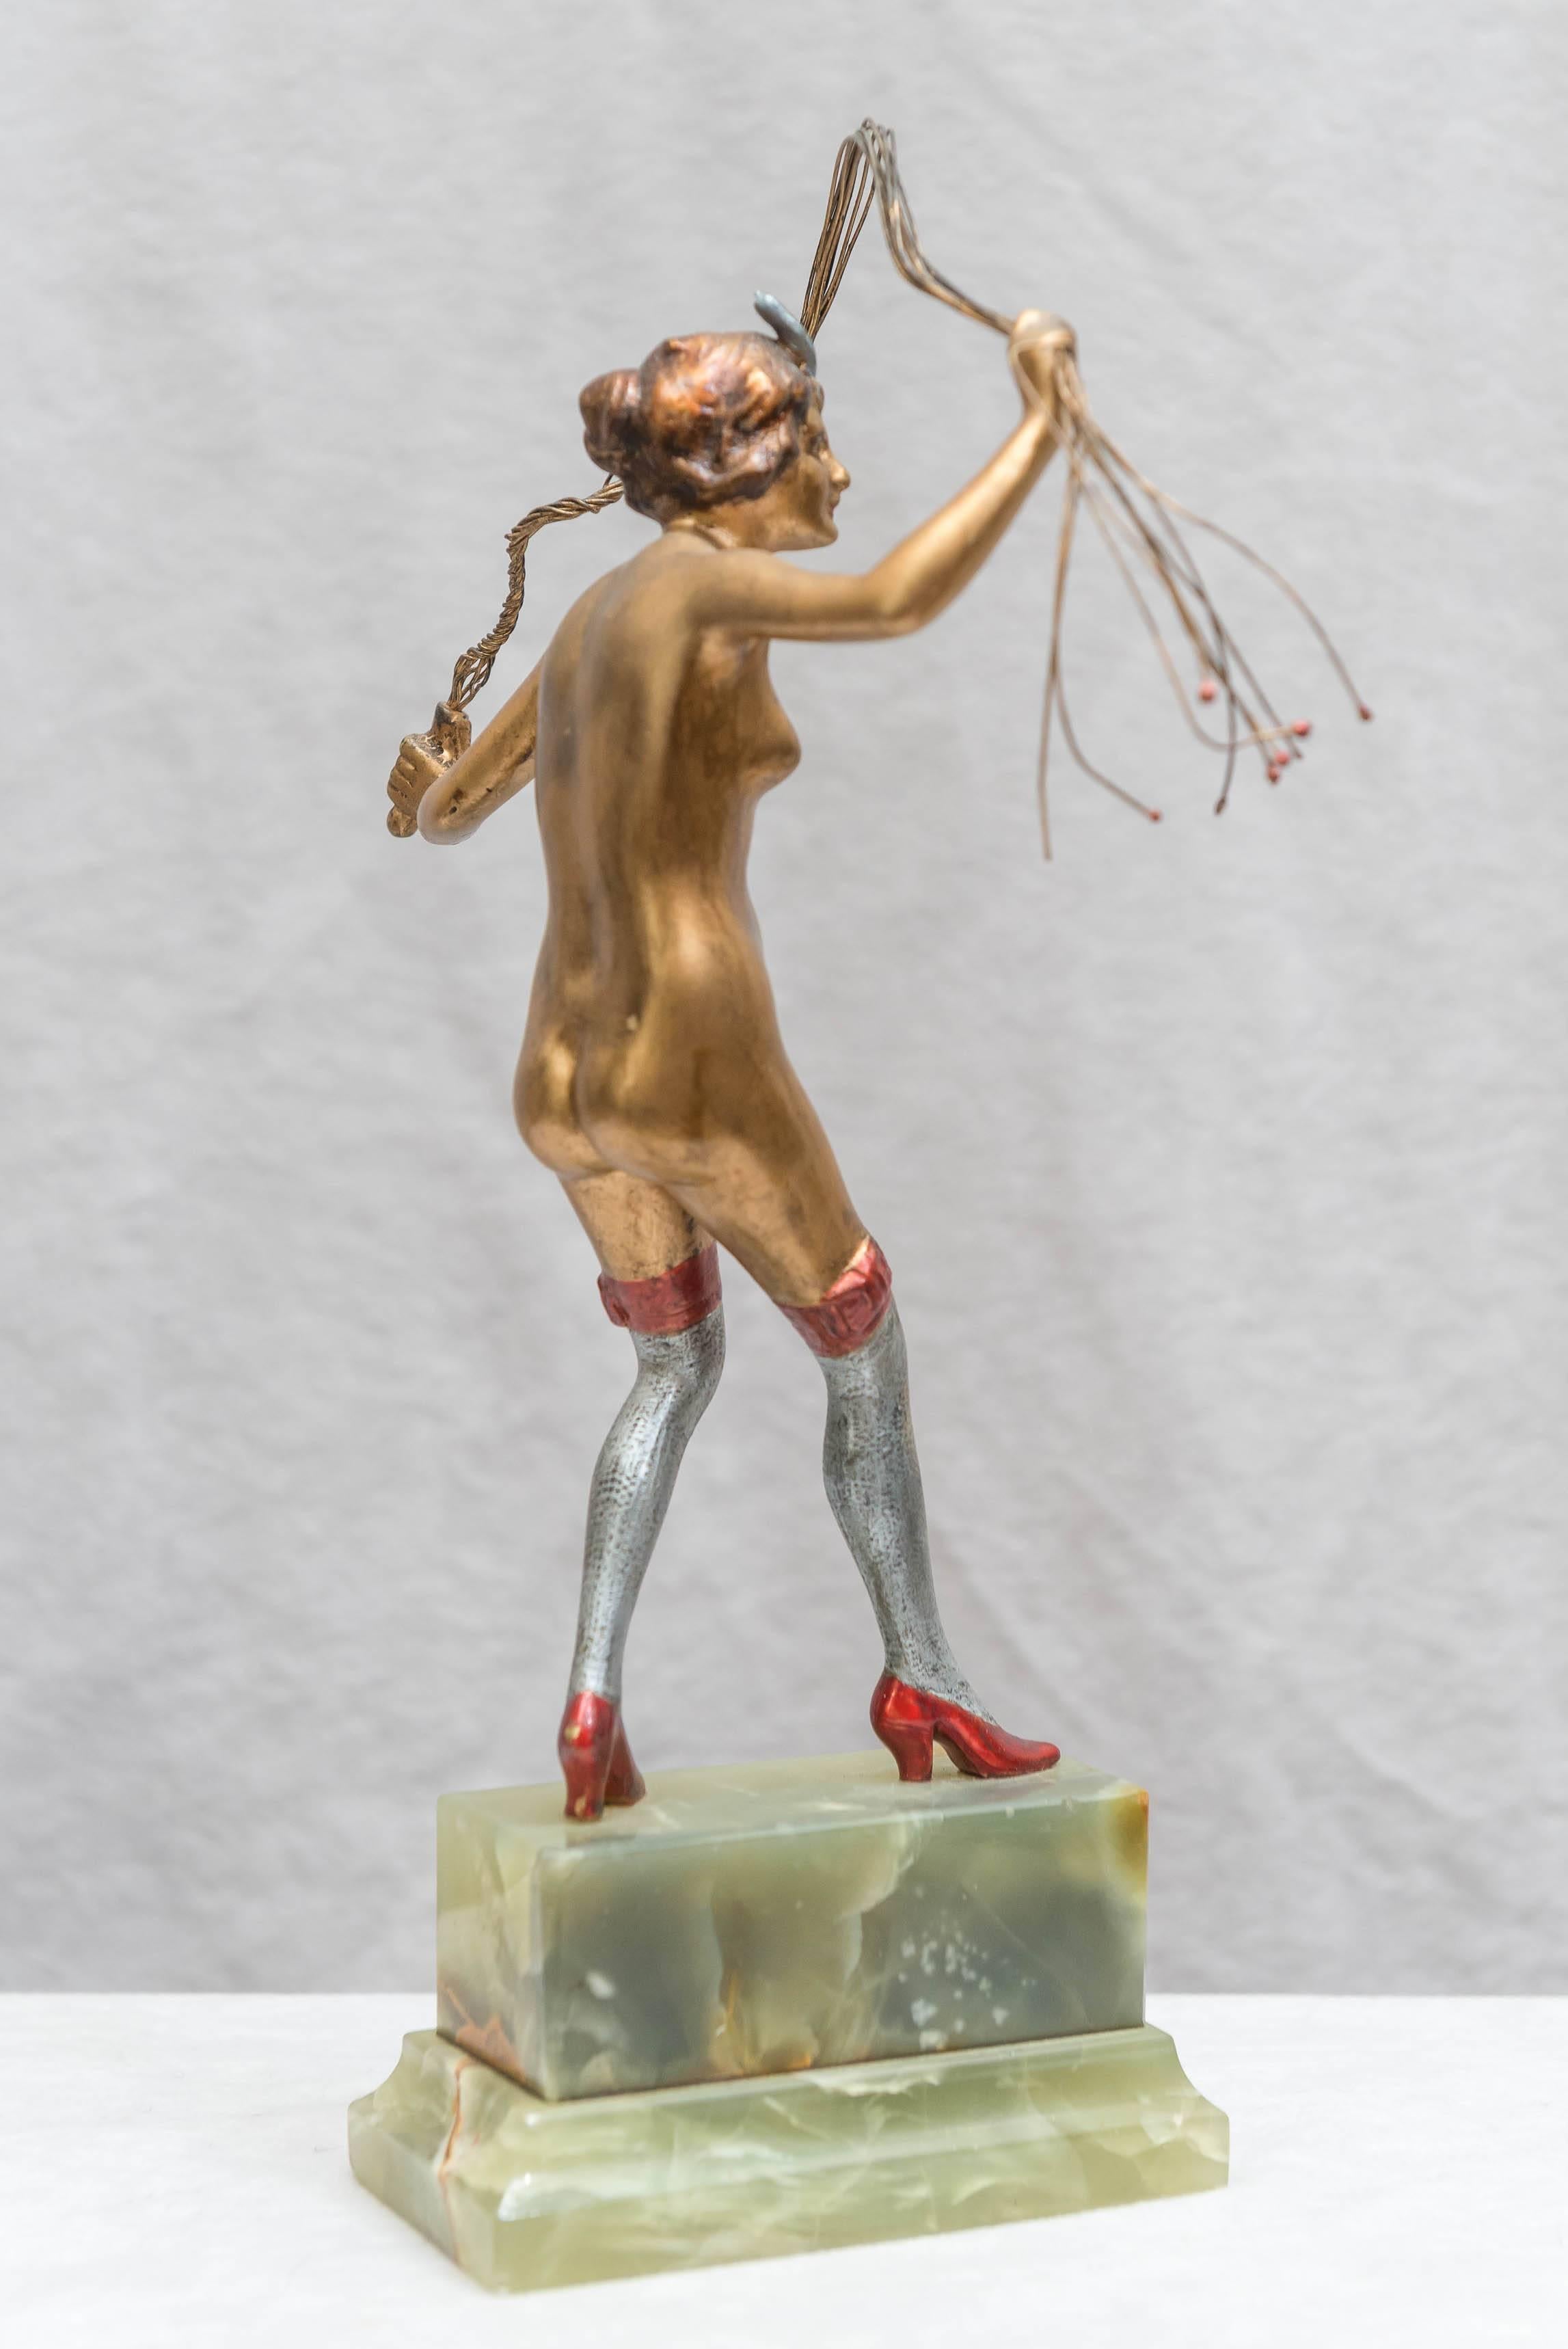 Art Deco Austrian Bronze Figure of a Nude Woman with Cat O' Nine Tails Whip 1